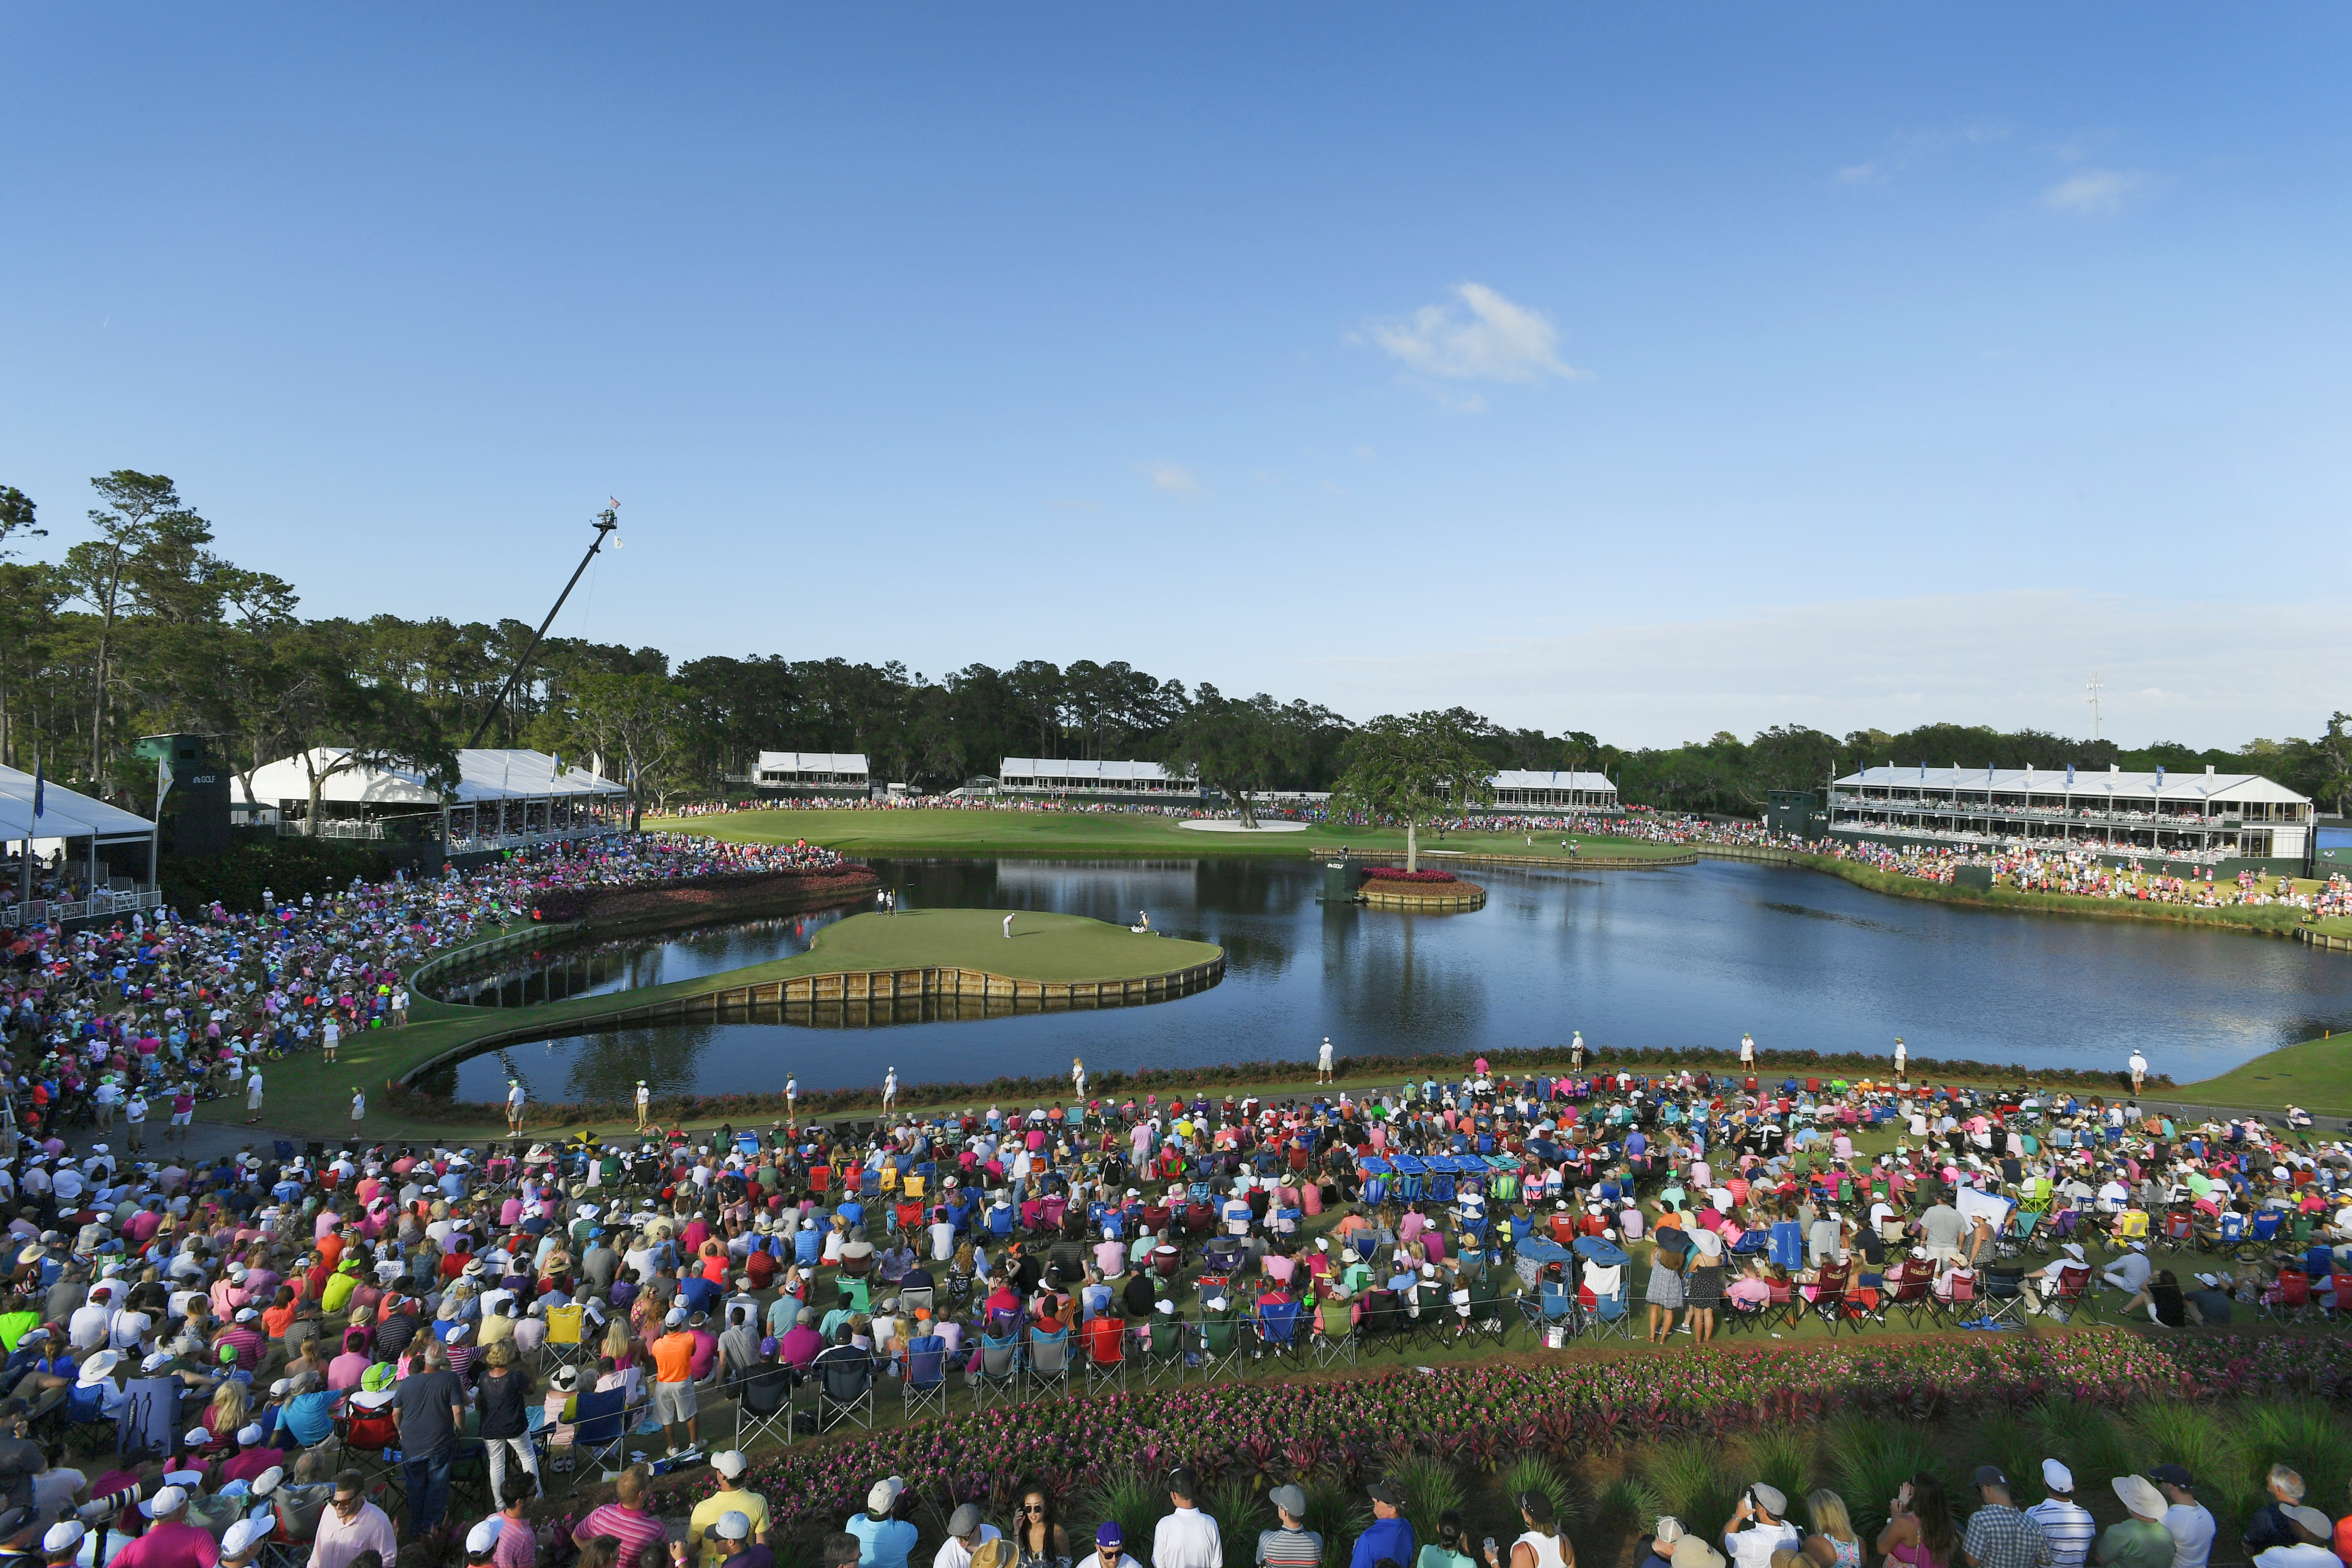 THE PLAYERS Championship – Final Round